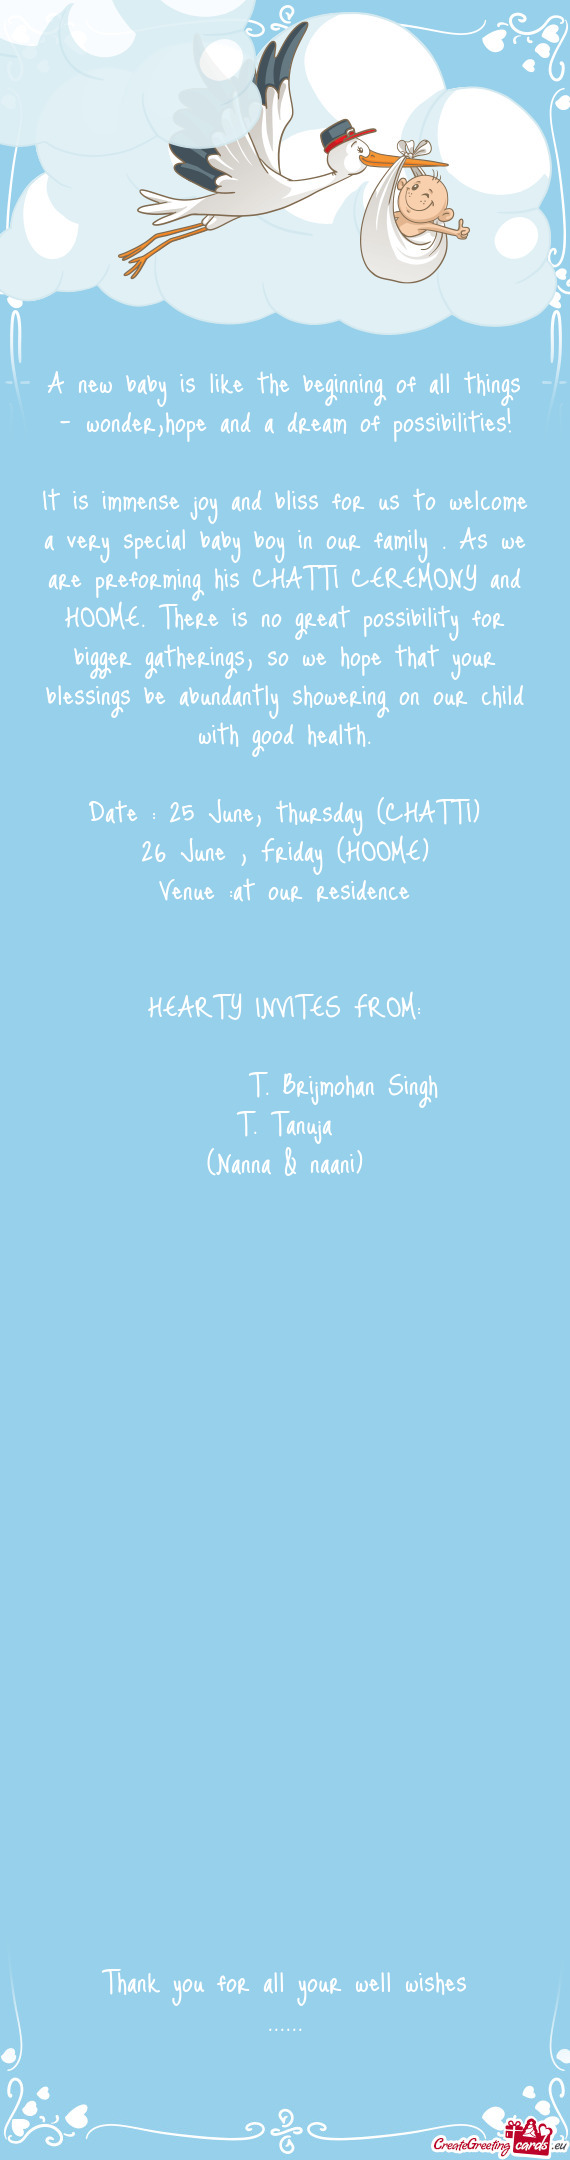 HEARTY INVITES FROM: